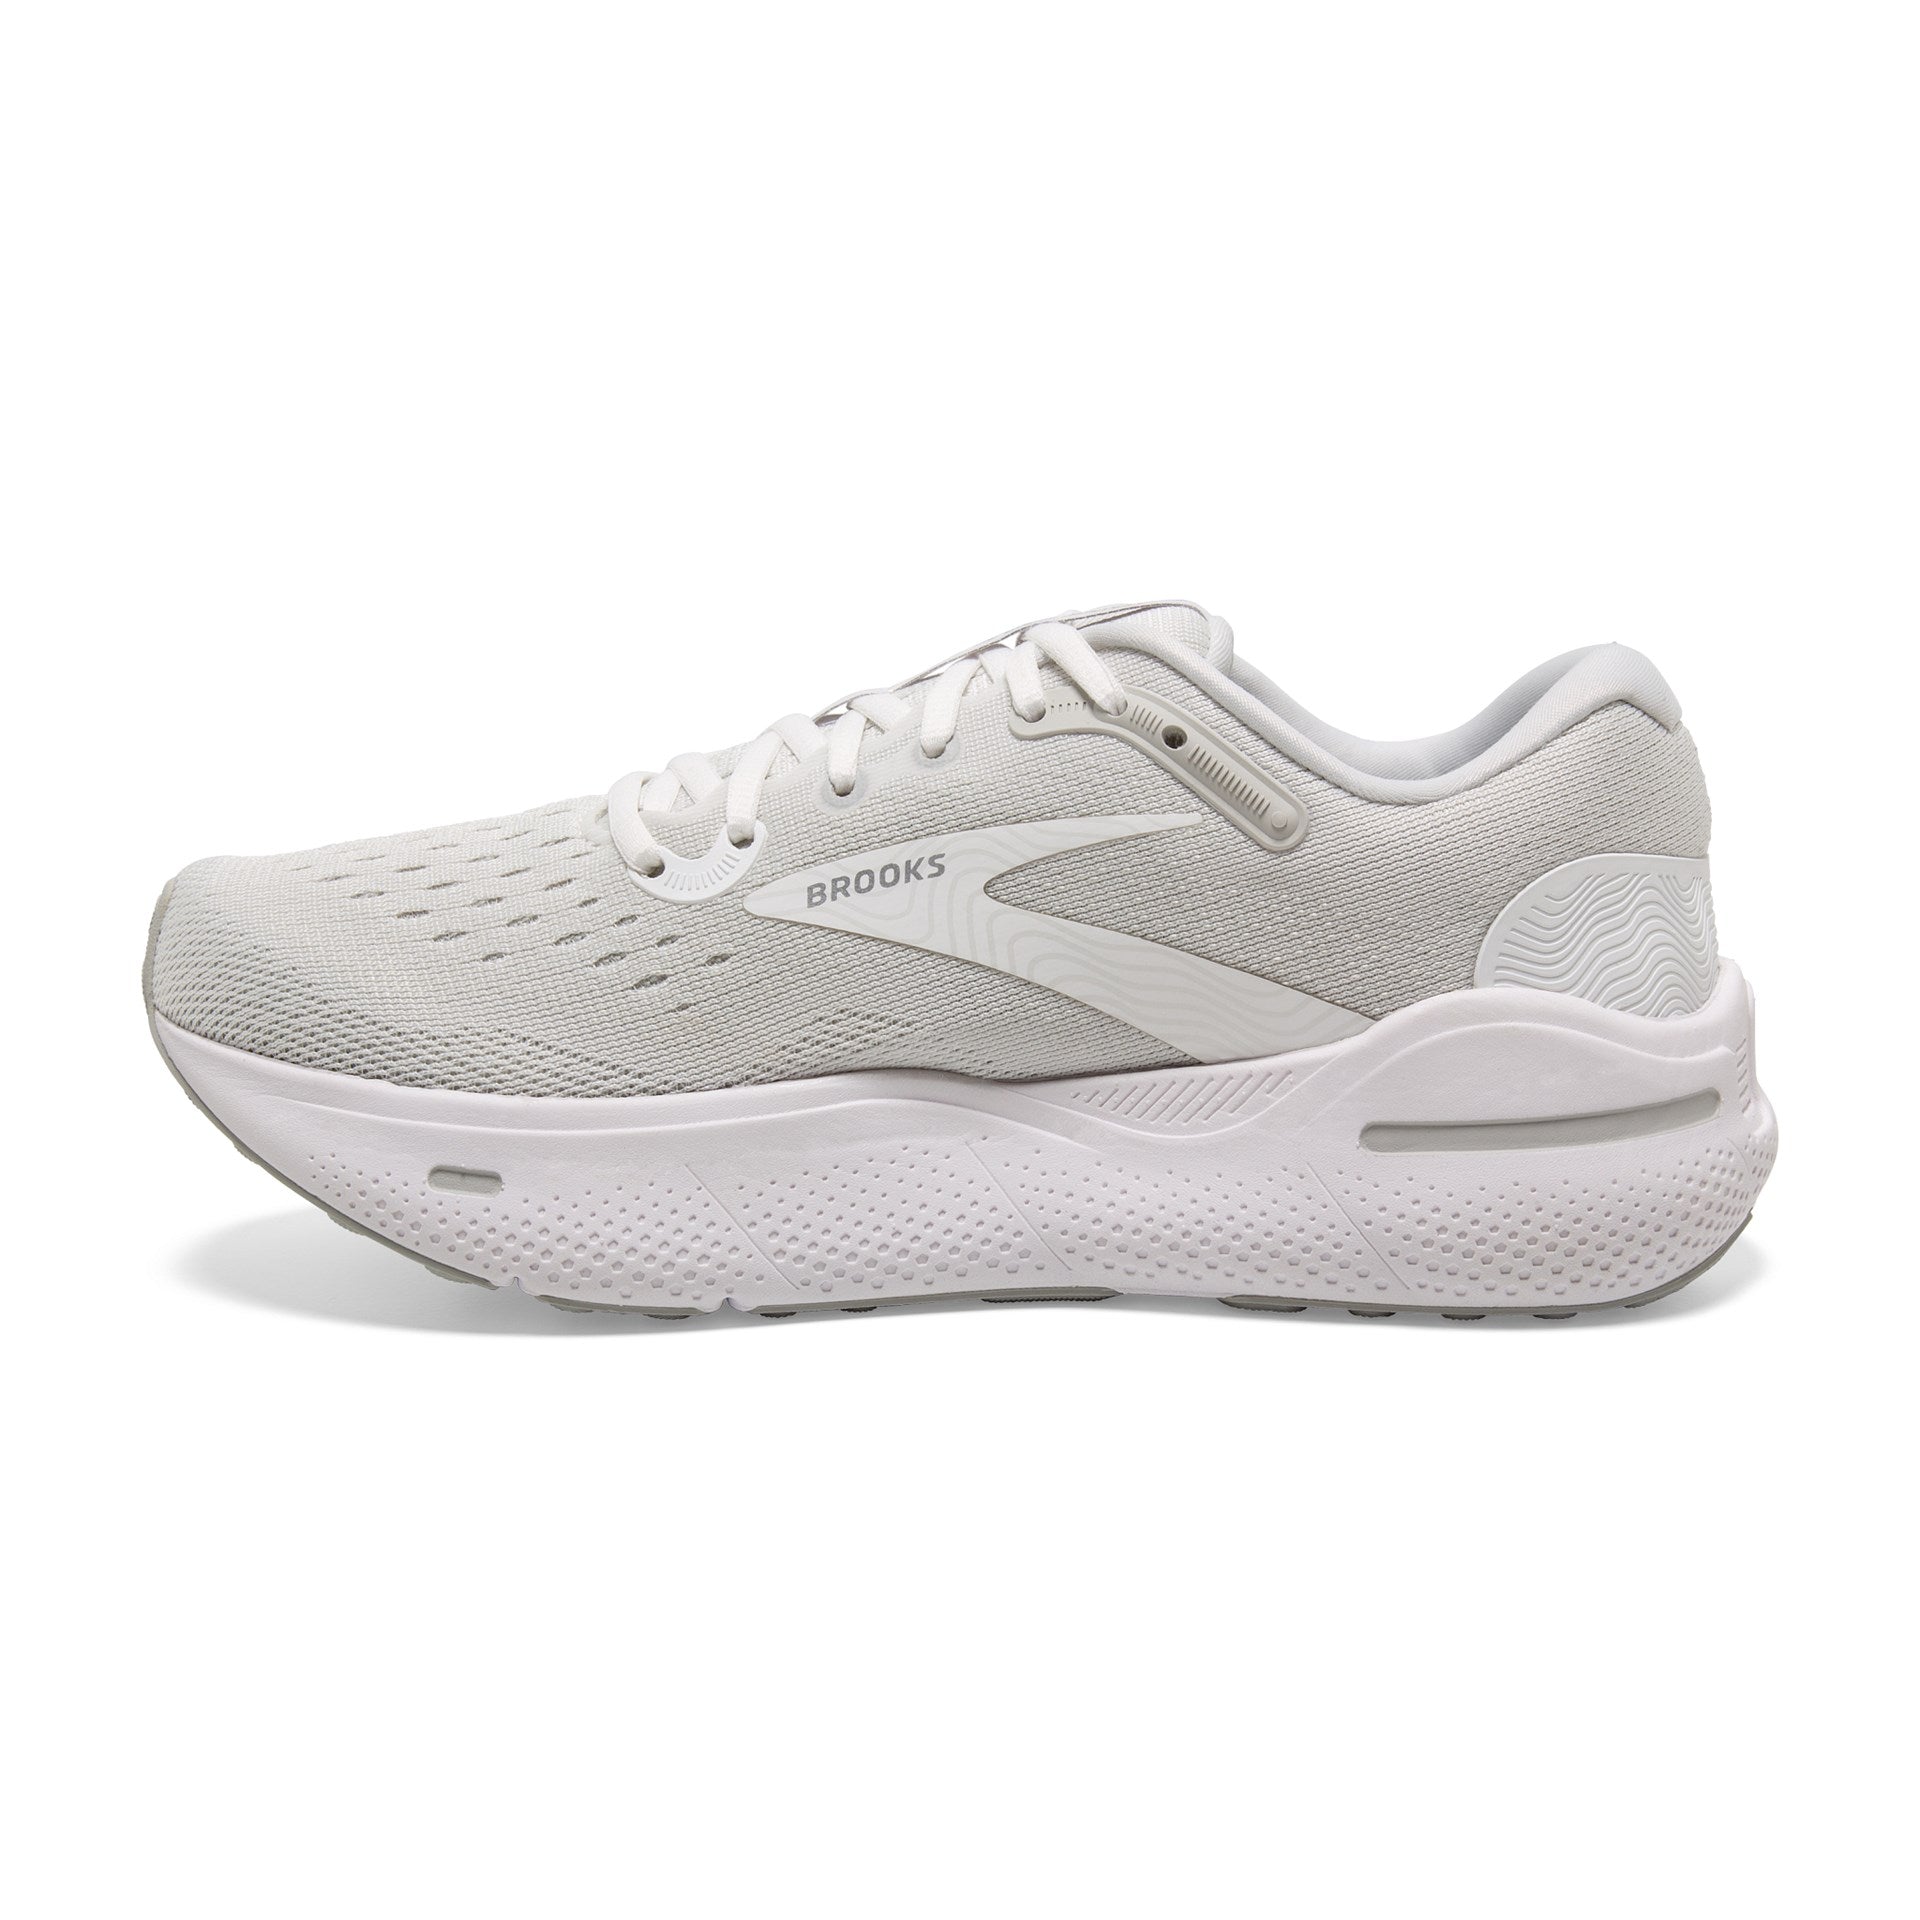 BROOKS WOMEN'S GHOST MAX - B - 124 WHITE/OYSTER 